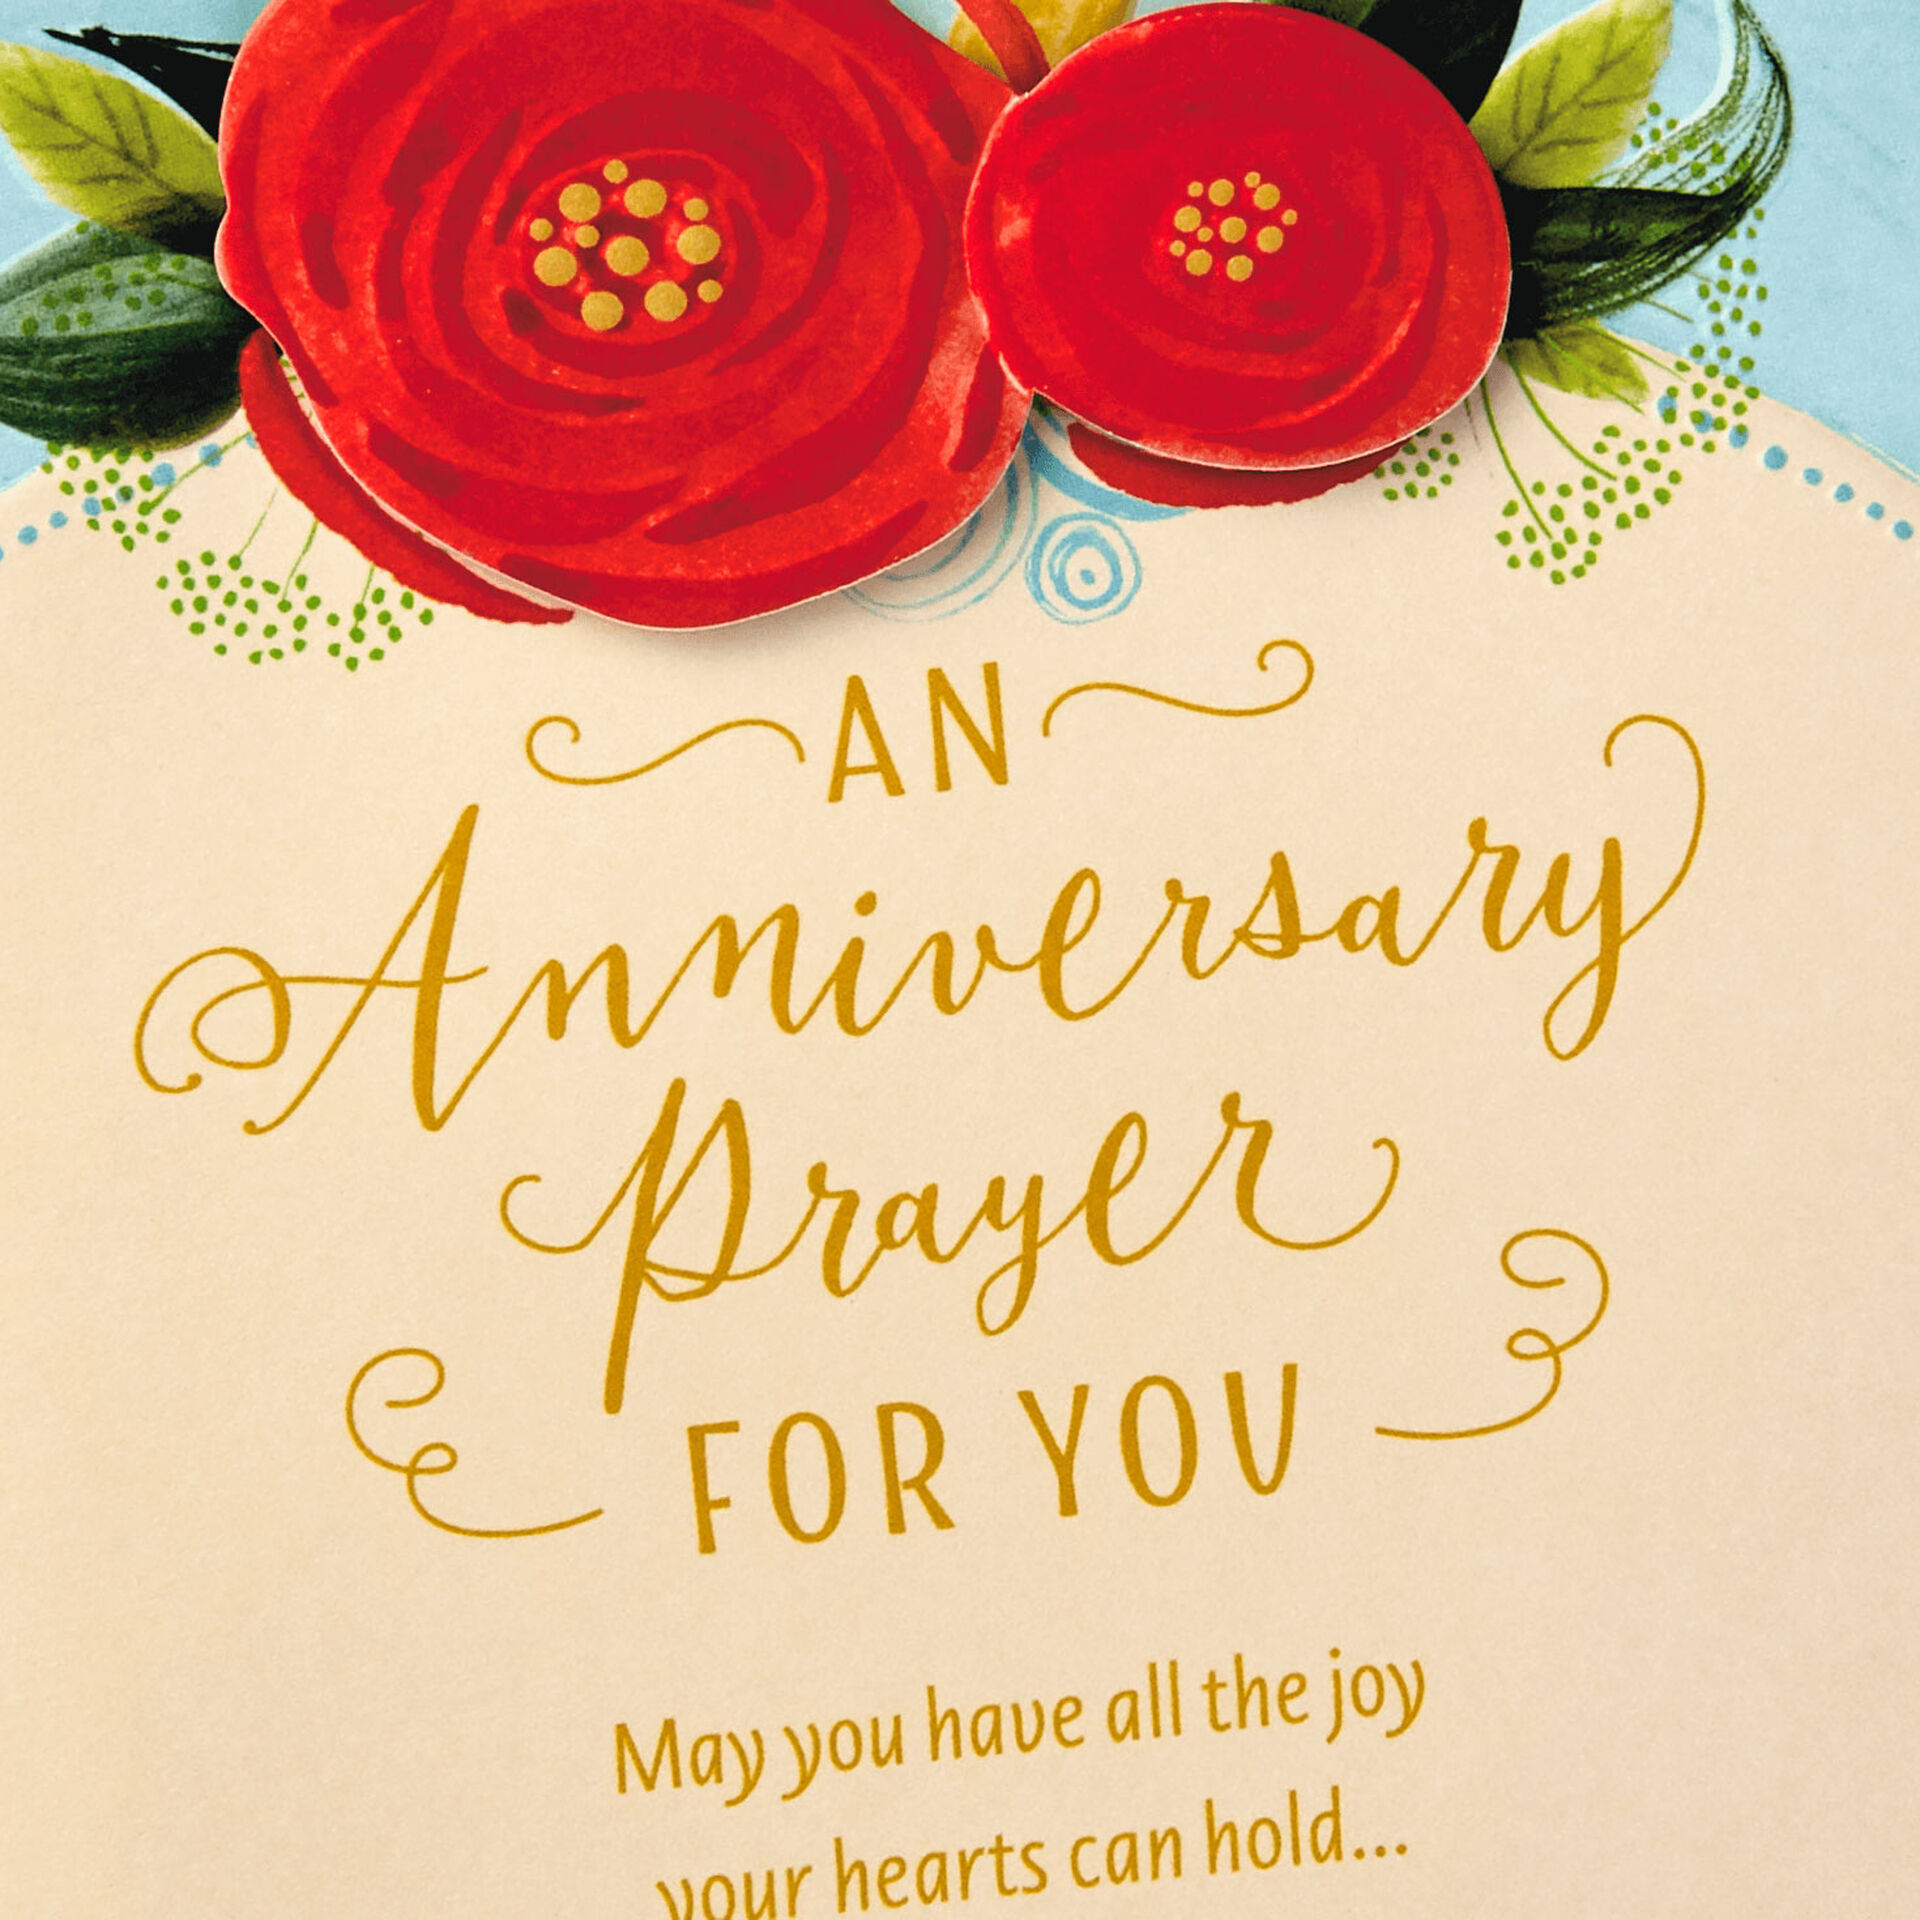 rose-buds-and-blessings-religious-anniversary-card-greeting-cards